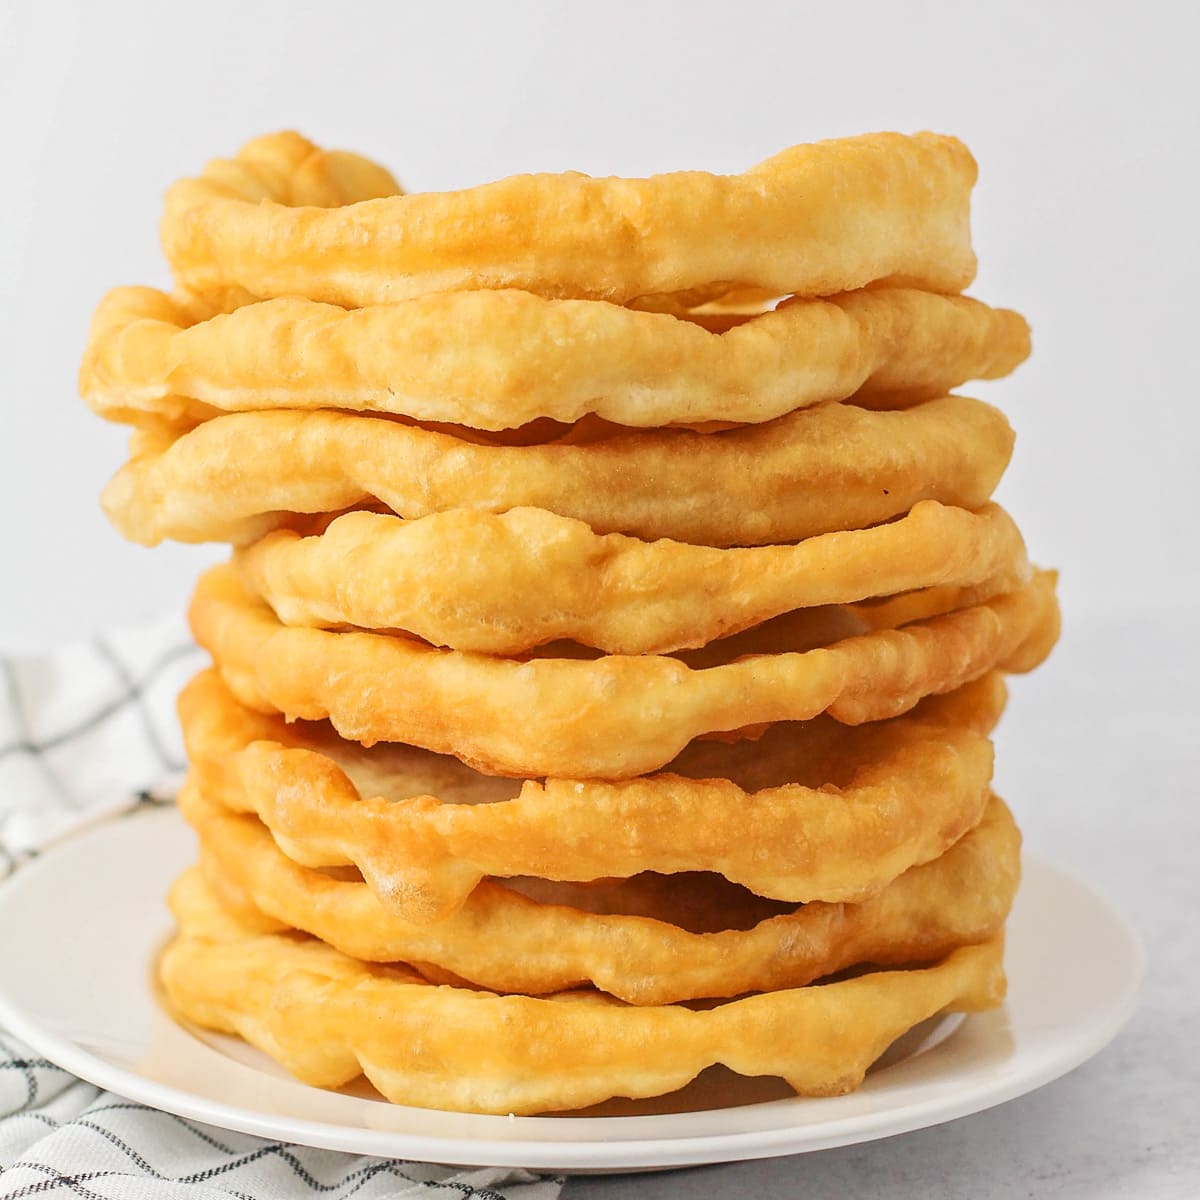 Several pieces of fry bread stacked on top of each other.